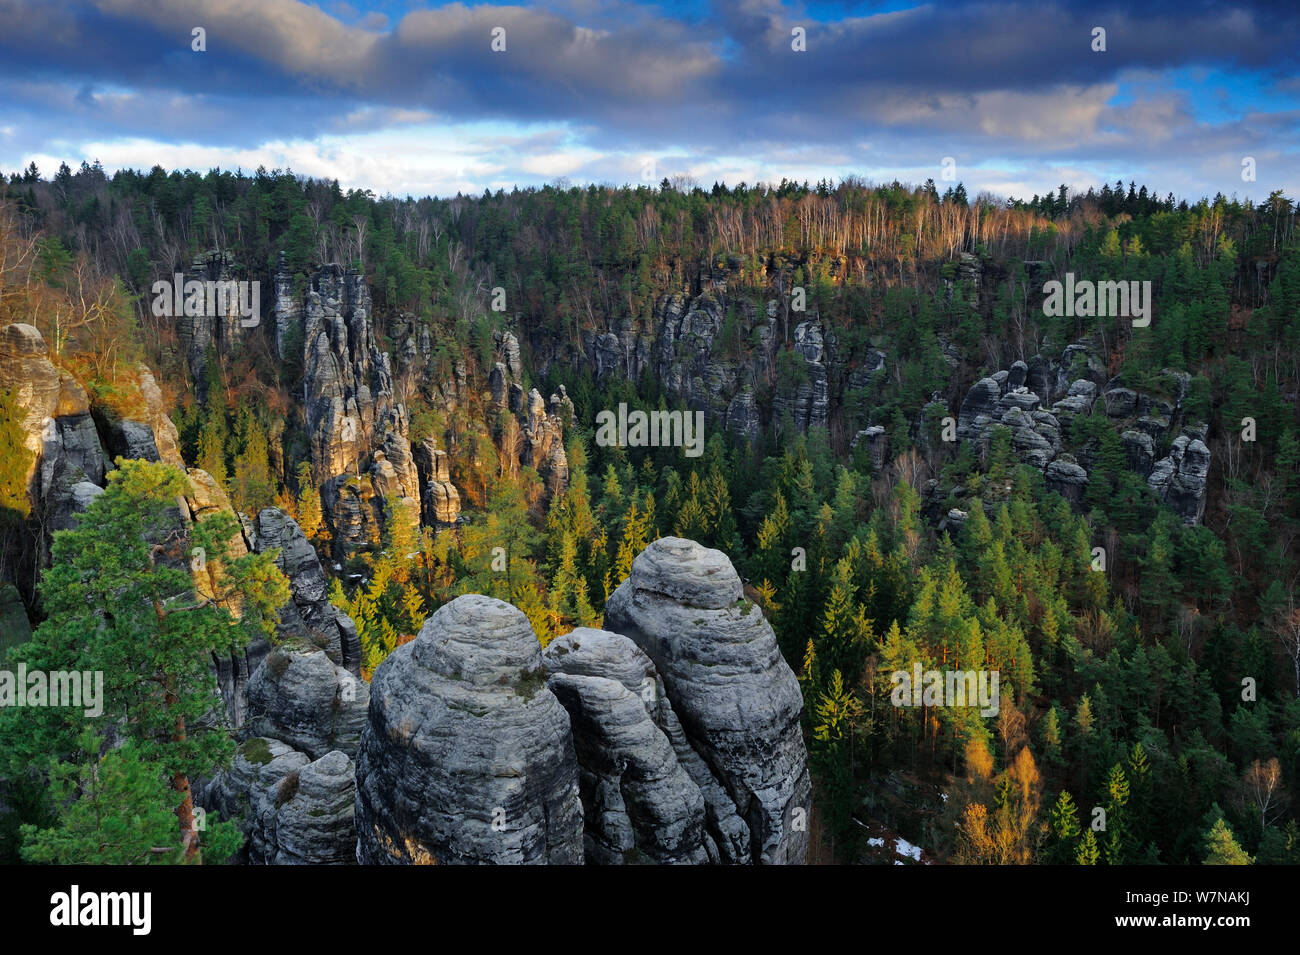 Trees and rock formations, Elbe Sandstone Mountains, Saxony, Germany, February 2011 Stock Photo